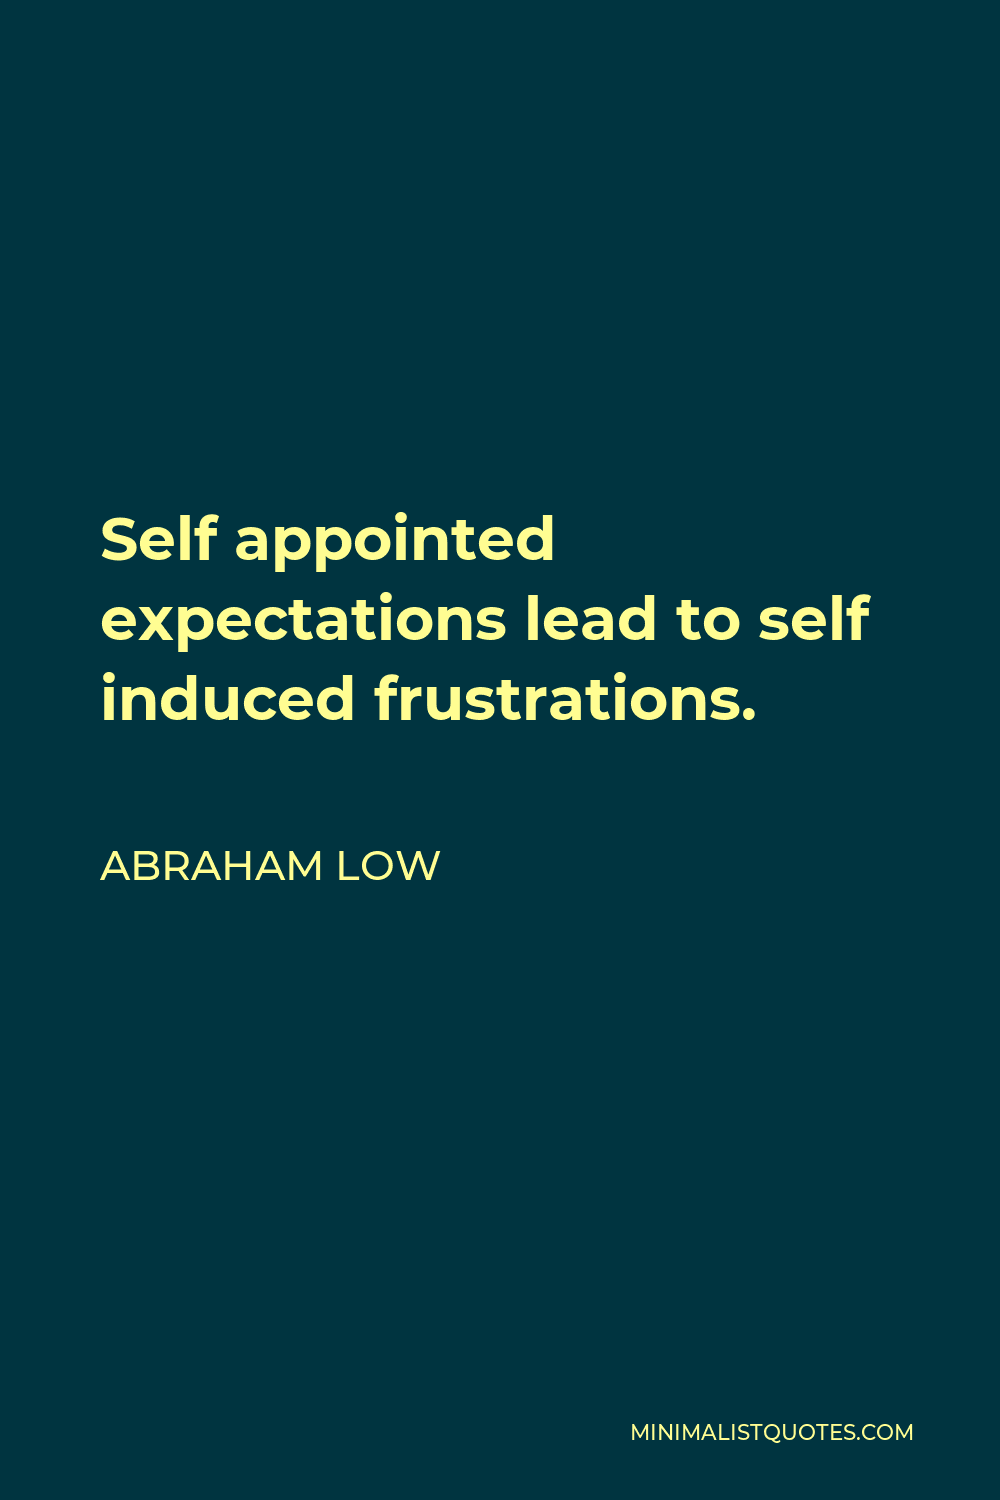 Abraham Low Quote - Self appointed expectations lead to self induced frustrations.